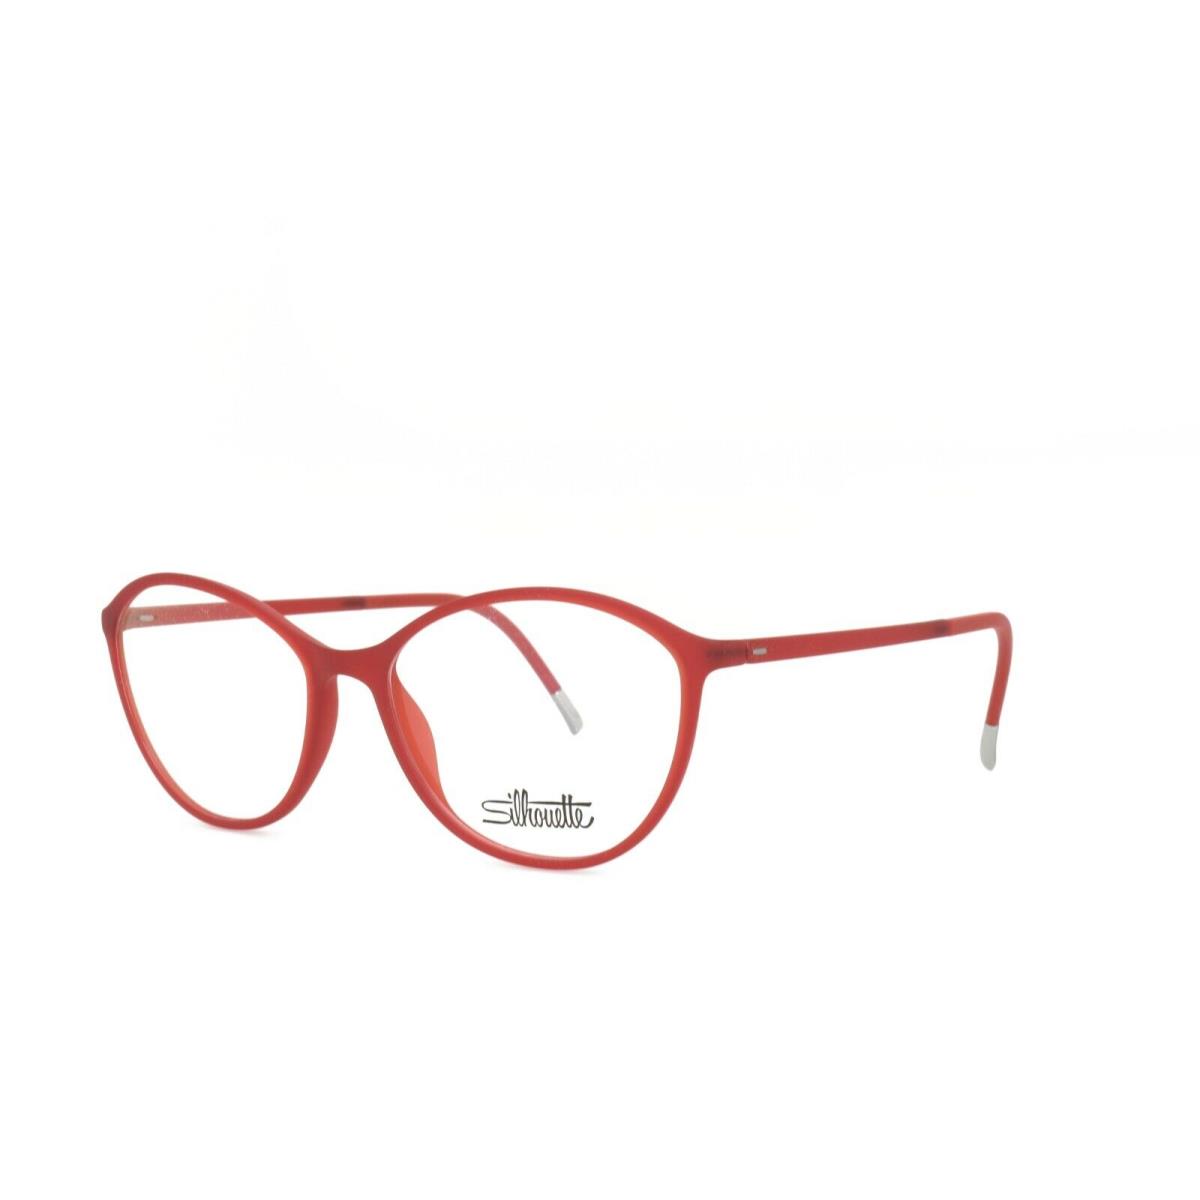 Silhouette Spx Illusion 1584 75 3110 Eyeglasses 52-15-130 Red - Red Frame